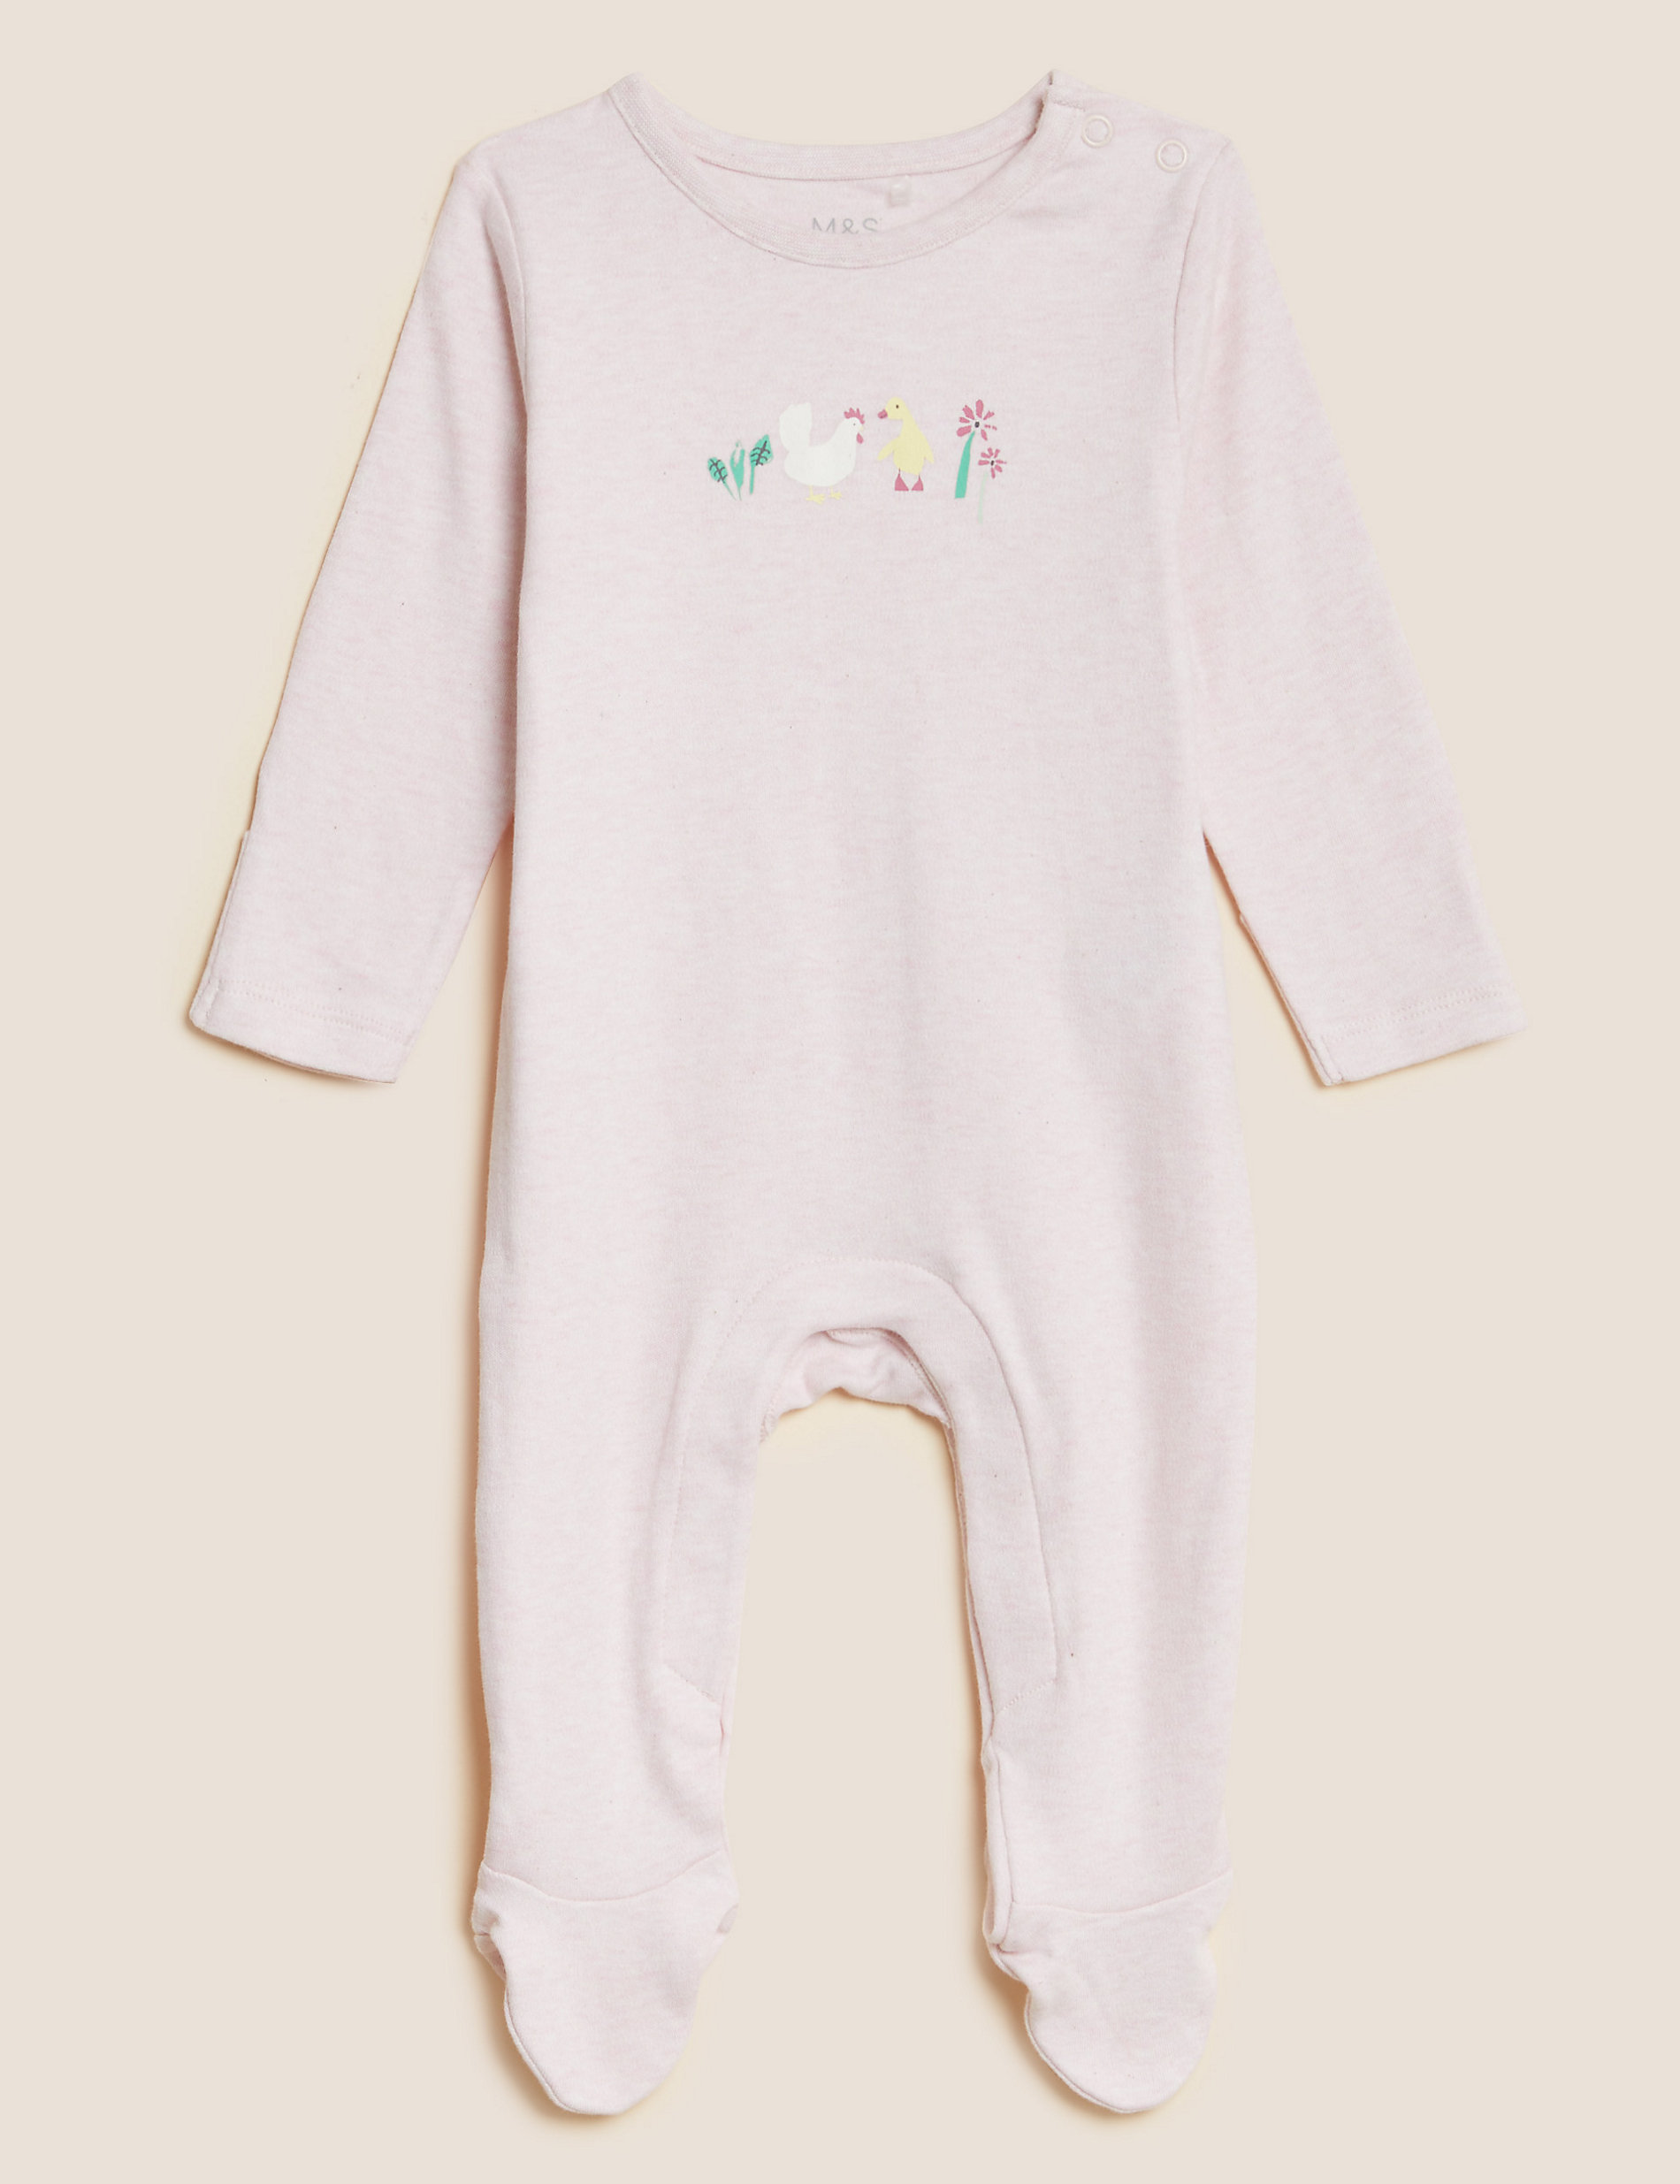 3pk Pure Cotton Duck & Chicken Sleepsuits (6½lbs - 3 Yrs)